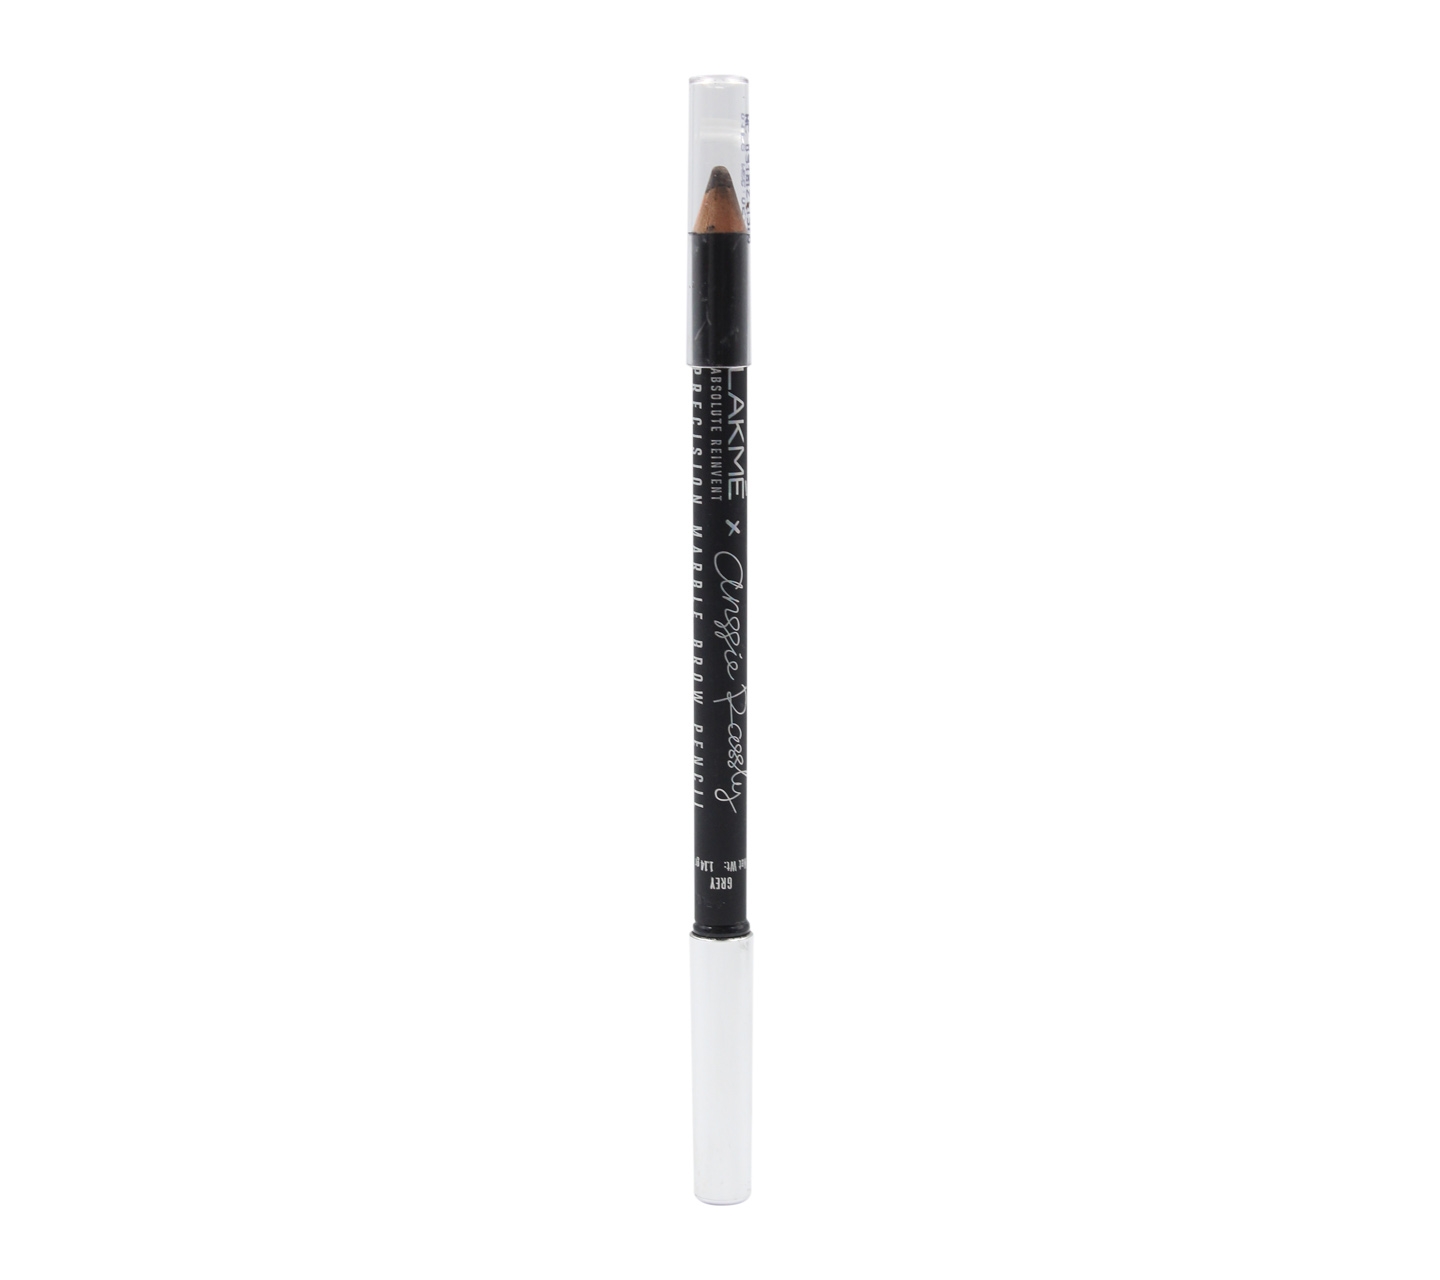 Lakme Absolute Precision Marble Brow Pencil Eyes